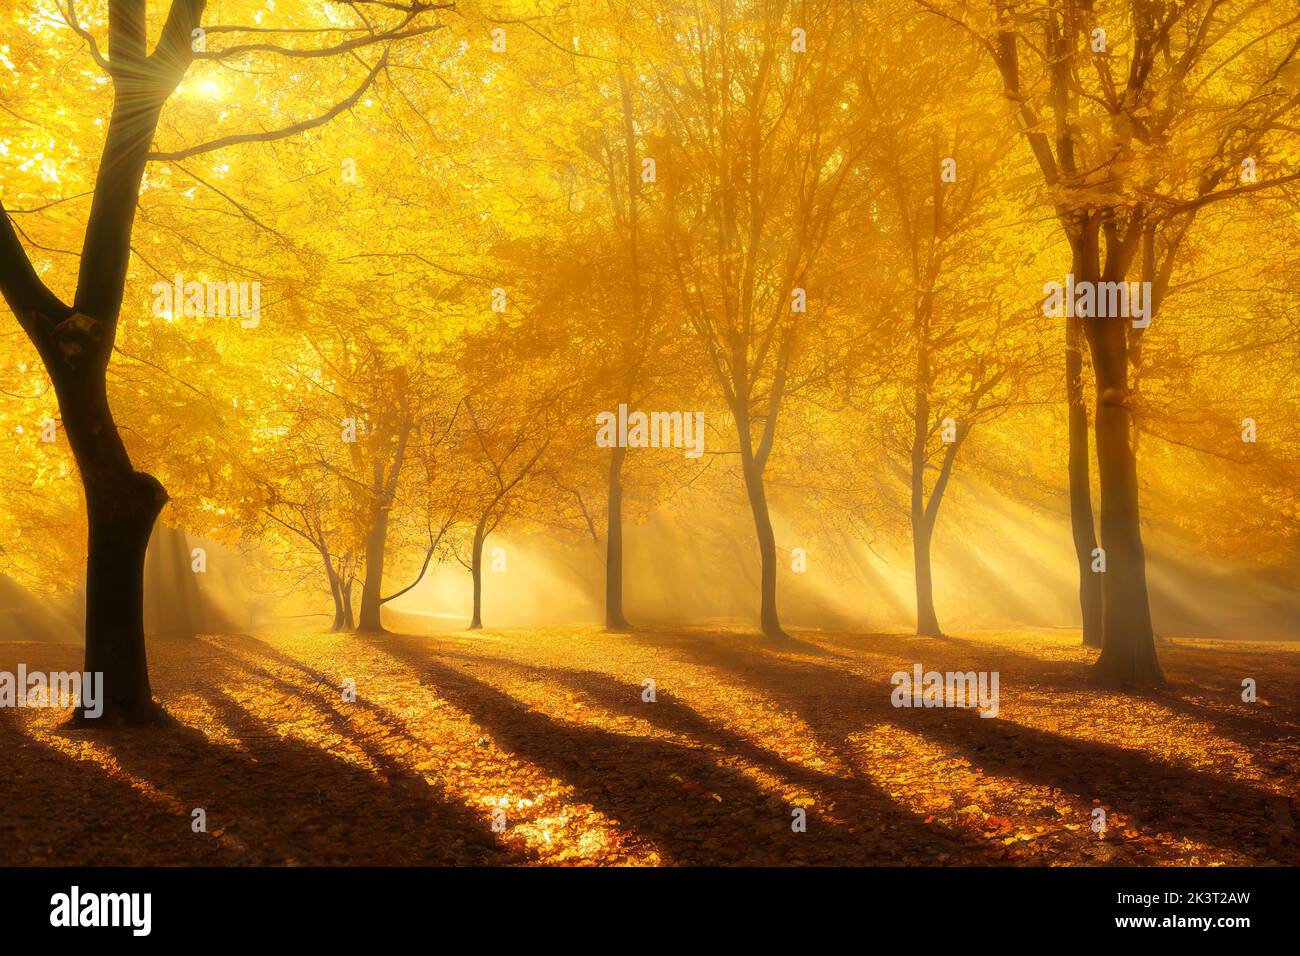 Evening in autumn park, golden trees, dramatic long shadows and sun rays. Digital 3D illustration Stock Photo